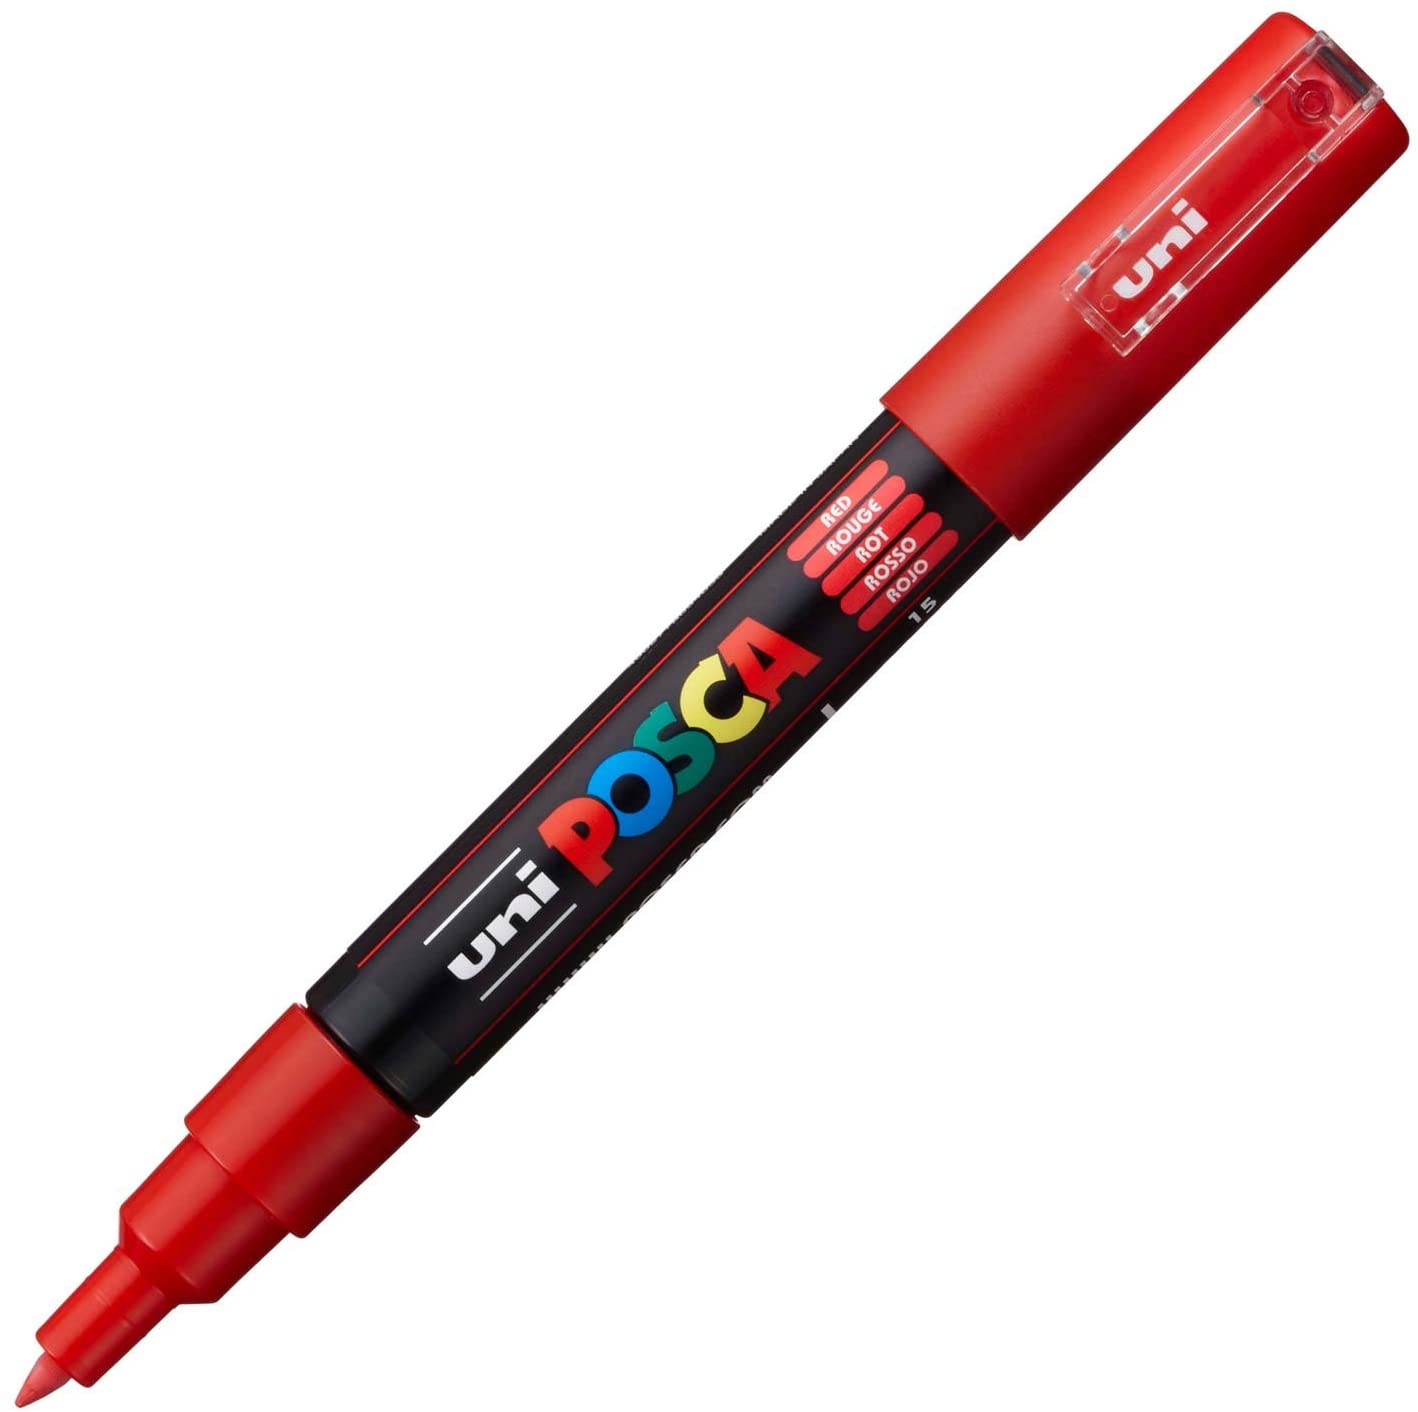 POSCA Acrylic Paint Markers - PC-1M / 0.7mm - Red by POSCA - K. A. Artist Shop